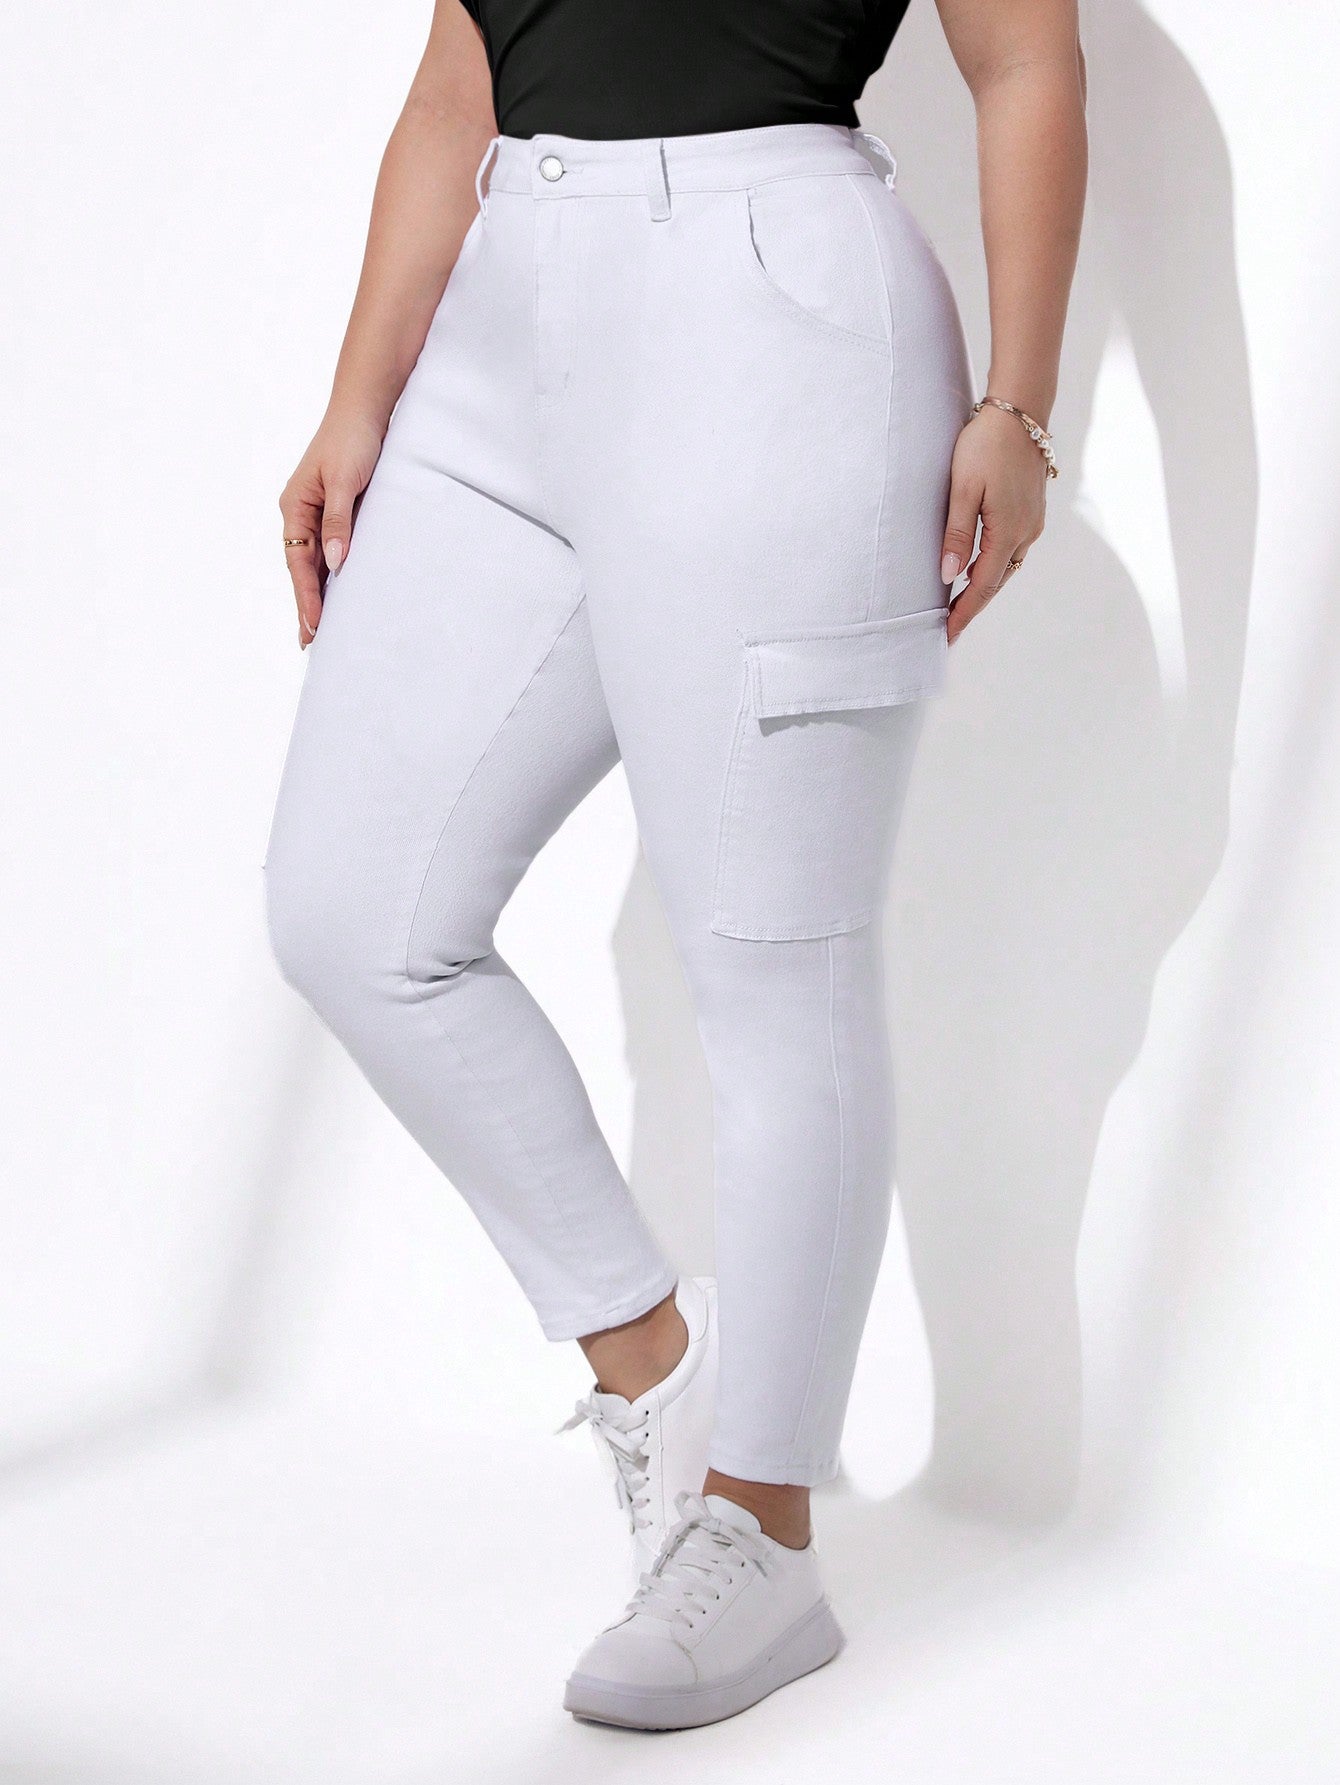 Women's Plus Size High Waisted Stretchy Skinny Jeans, White